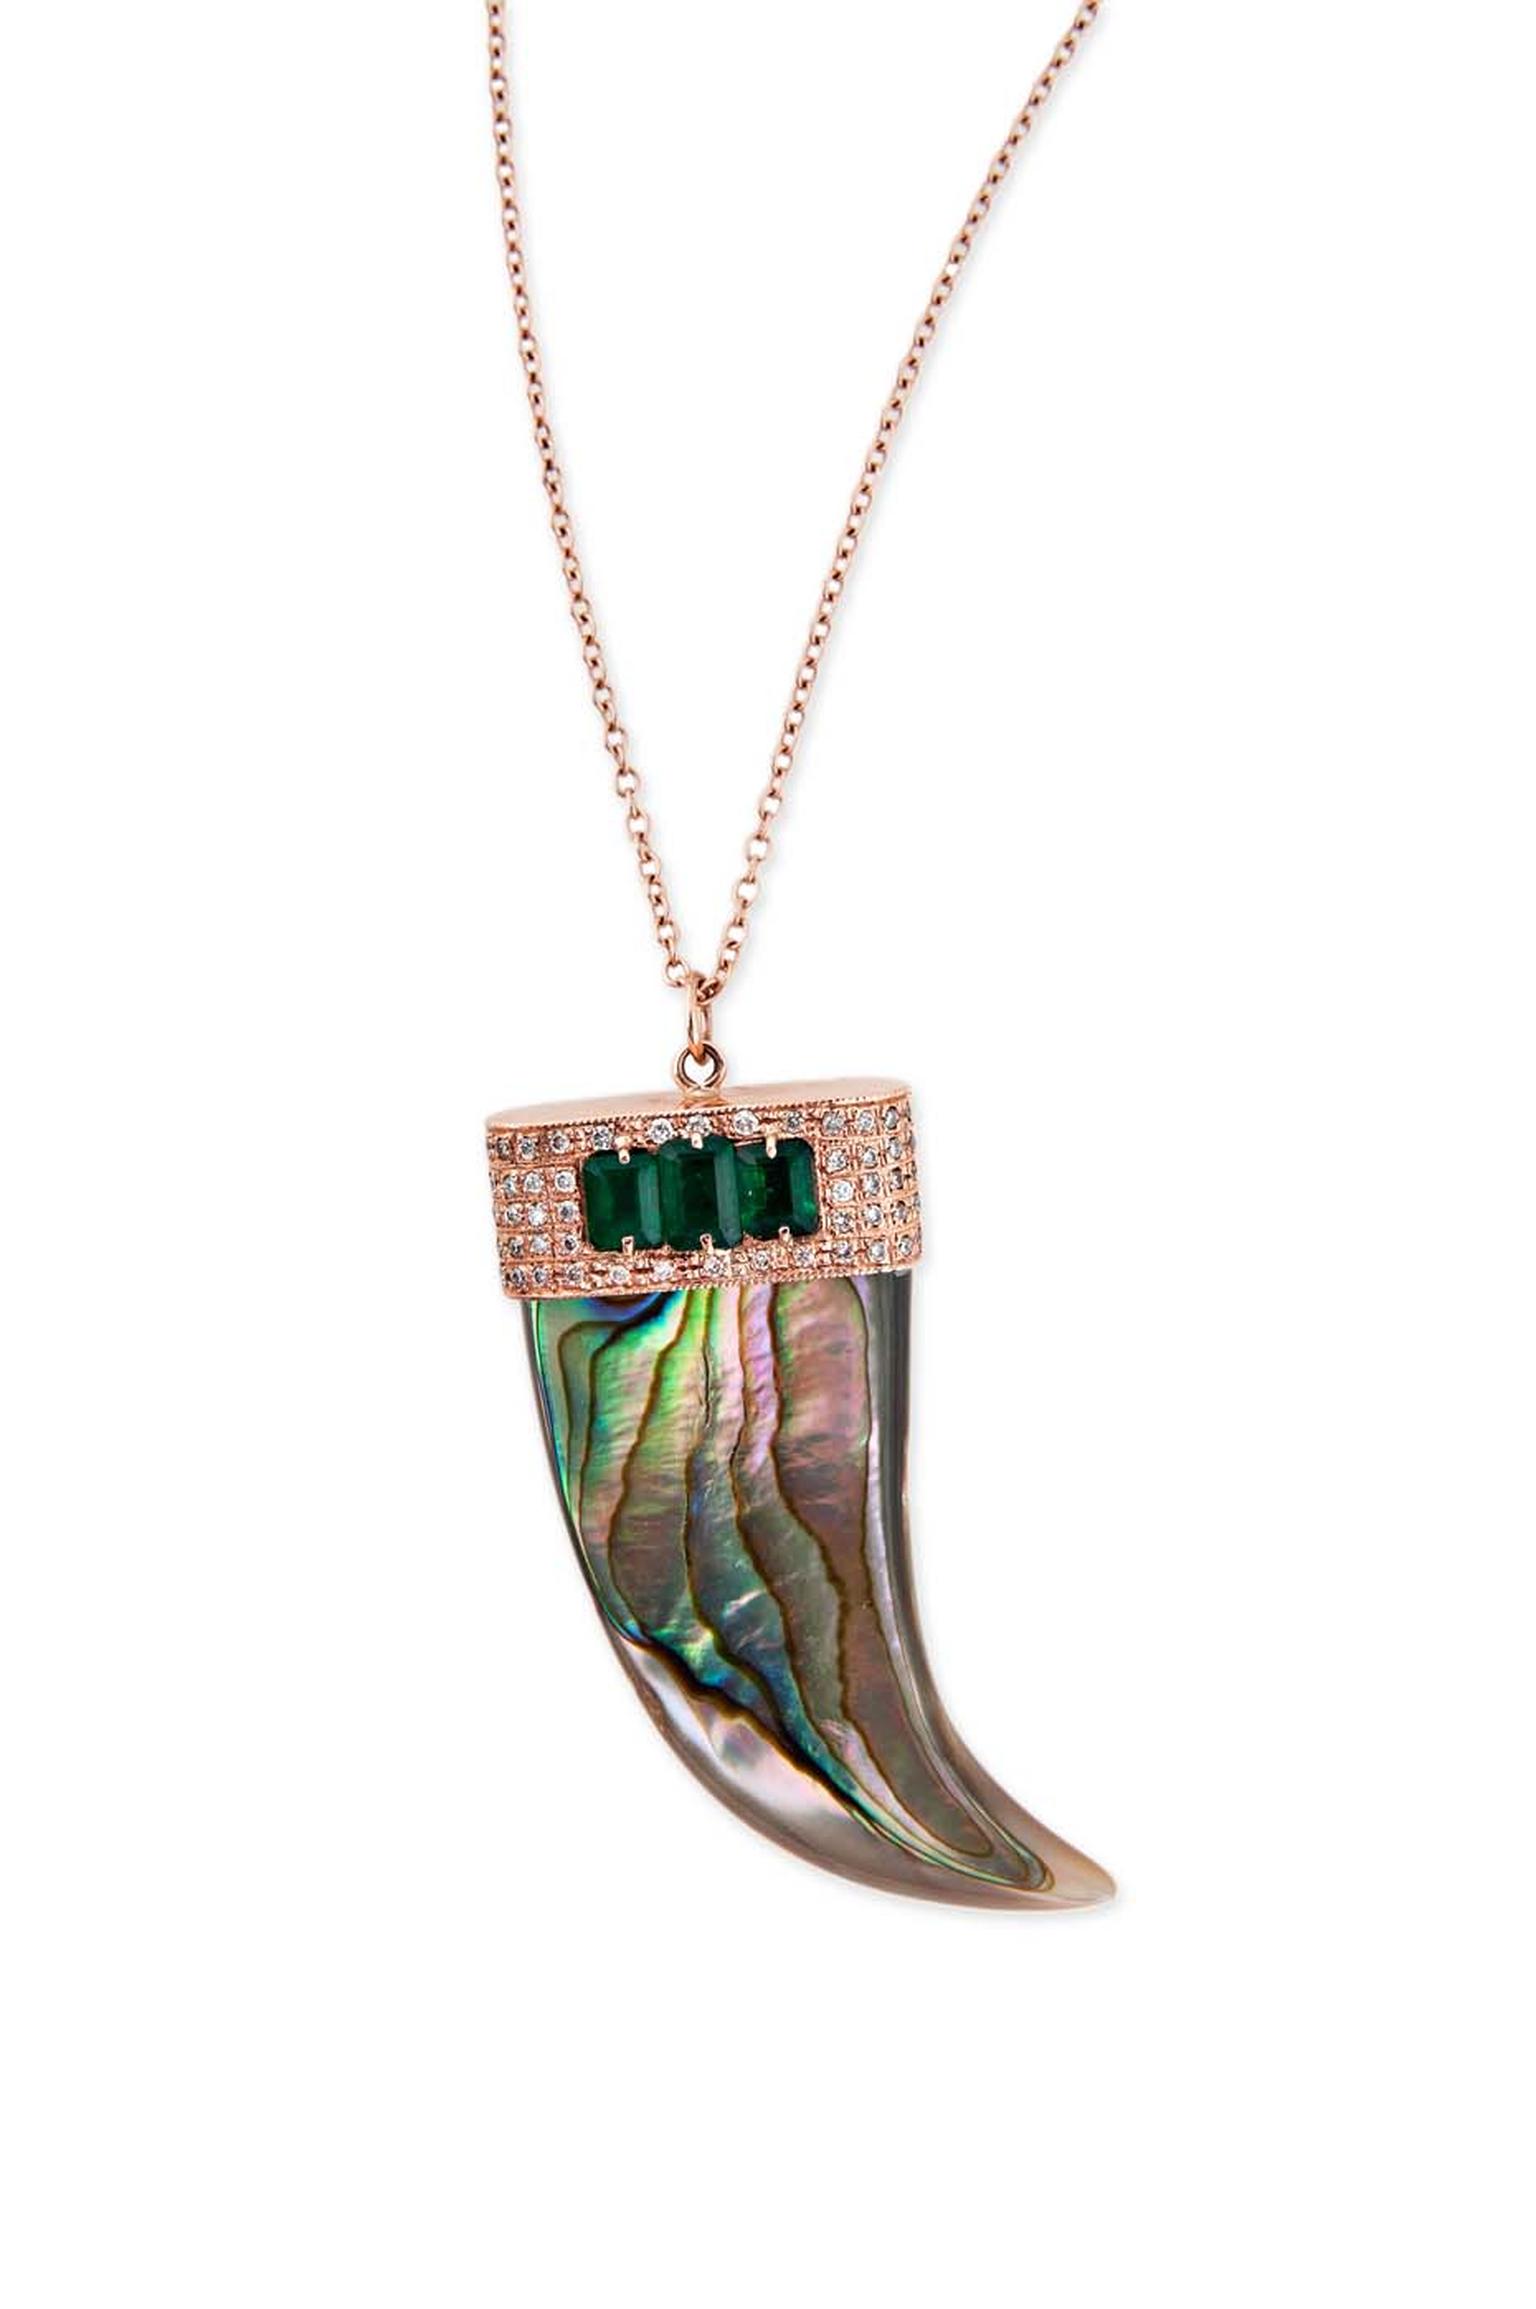 Jacquie Aiche's recent Gemfields collaboration includes a necklace of abalone horn embellished with emeralds and white diamonds.